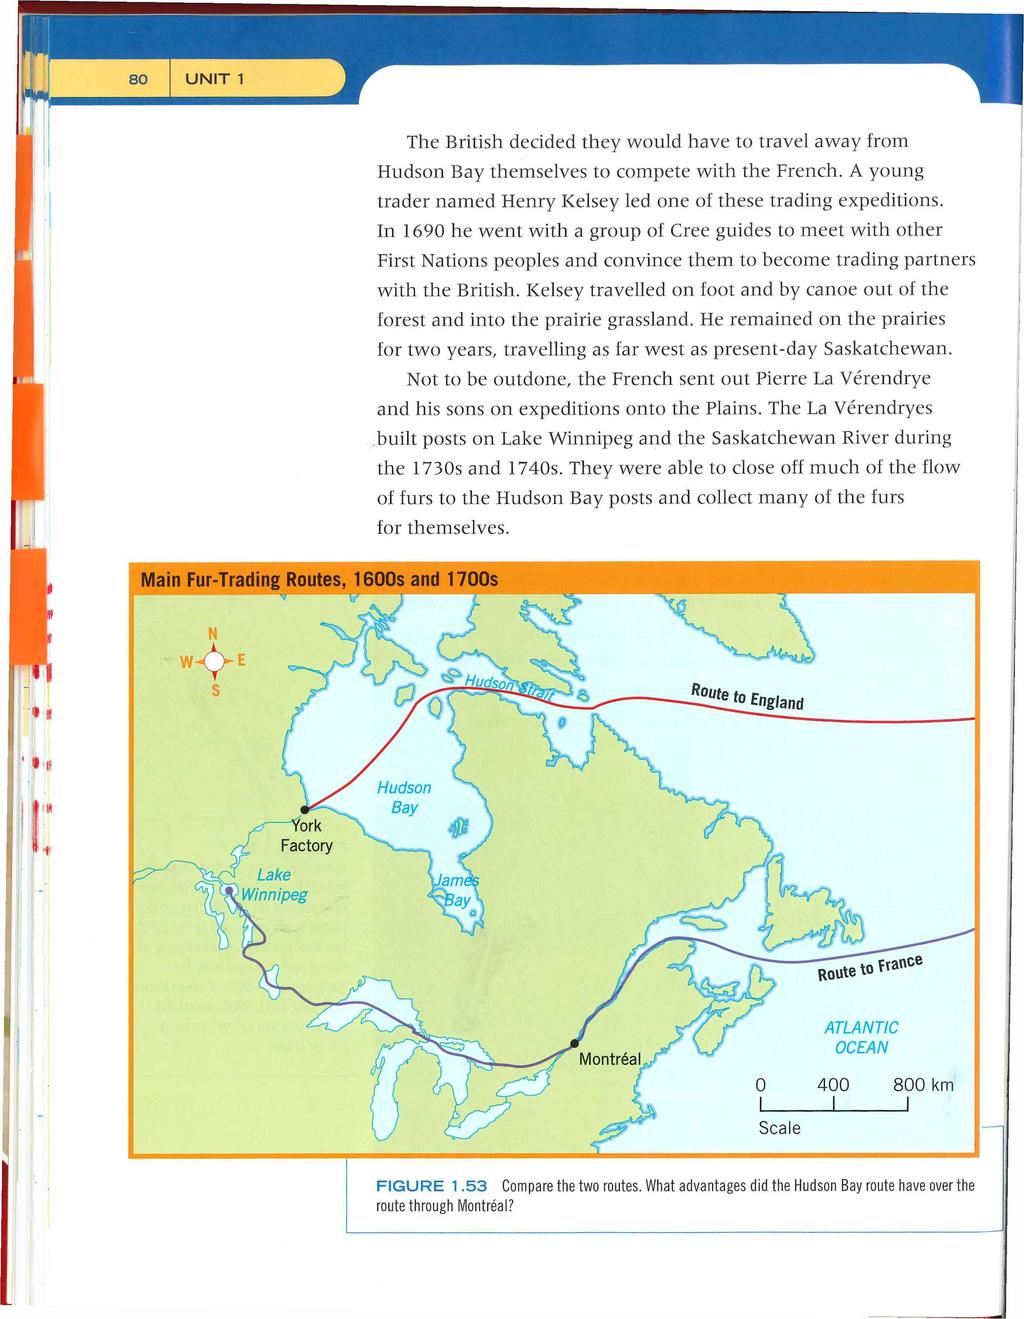 UNIT 1 The British decided they would have to travel away from Hudson Bay themselves to compete with the French. A young trader named Henry Kelsey led one of these trading expeditions.